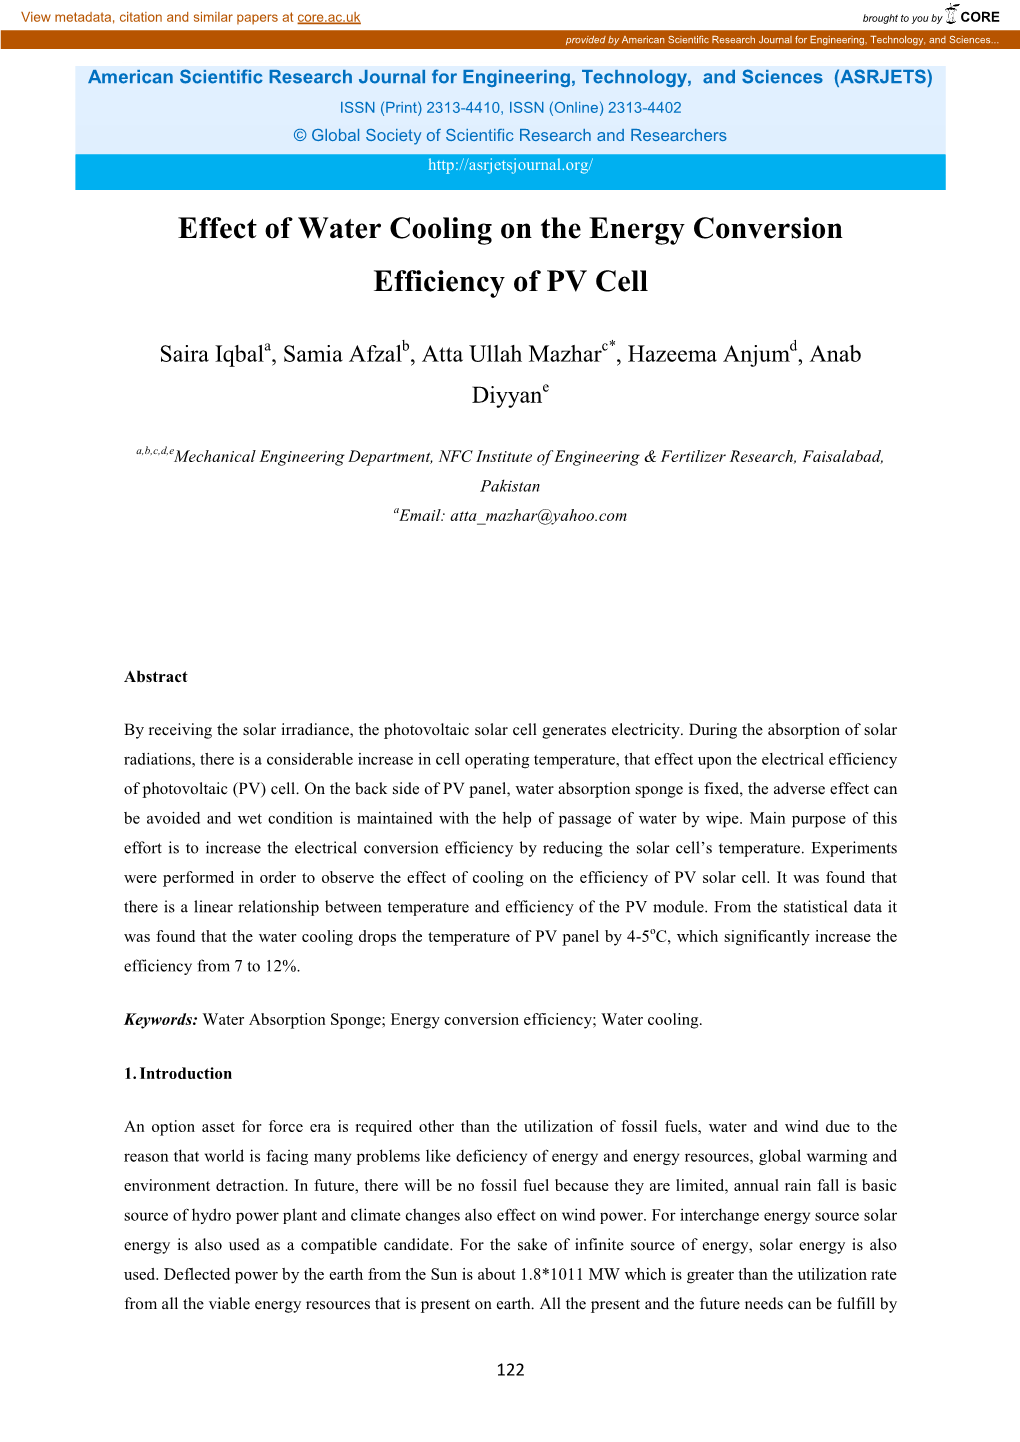 Effect of Water Cooling on the Energy Conversion Efficiency of PV Cell